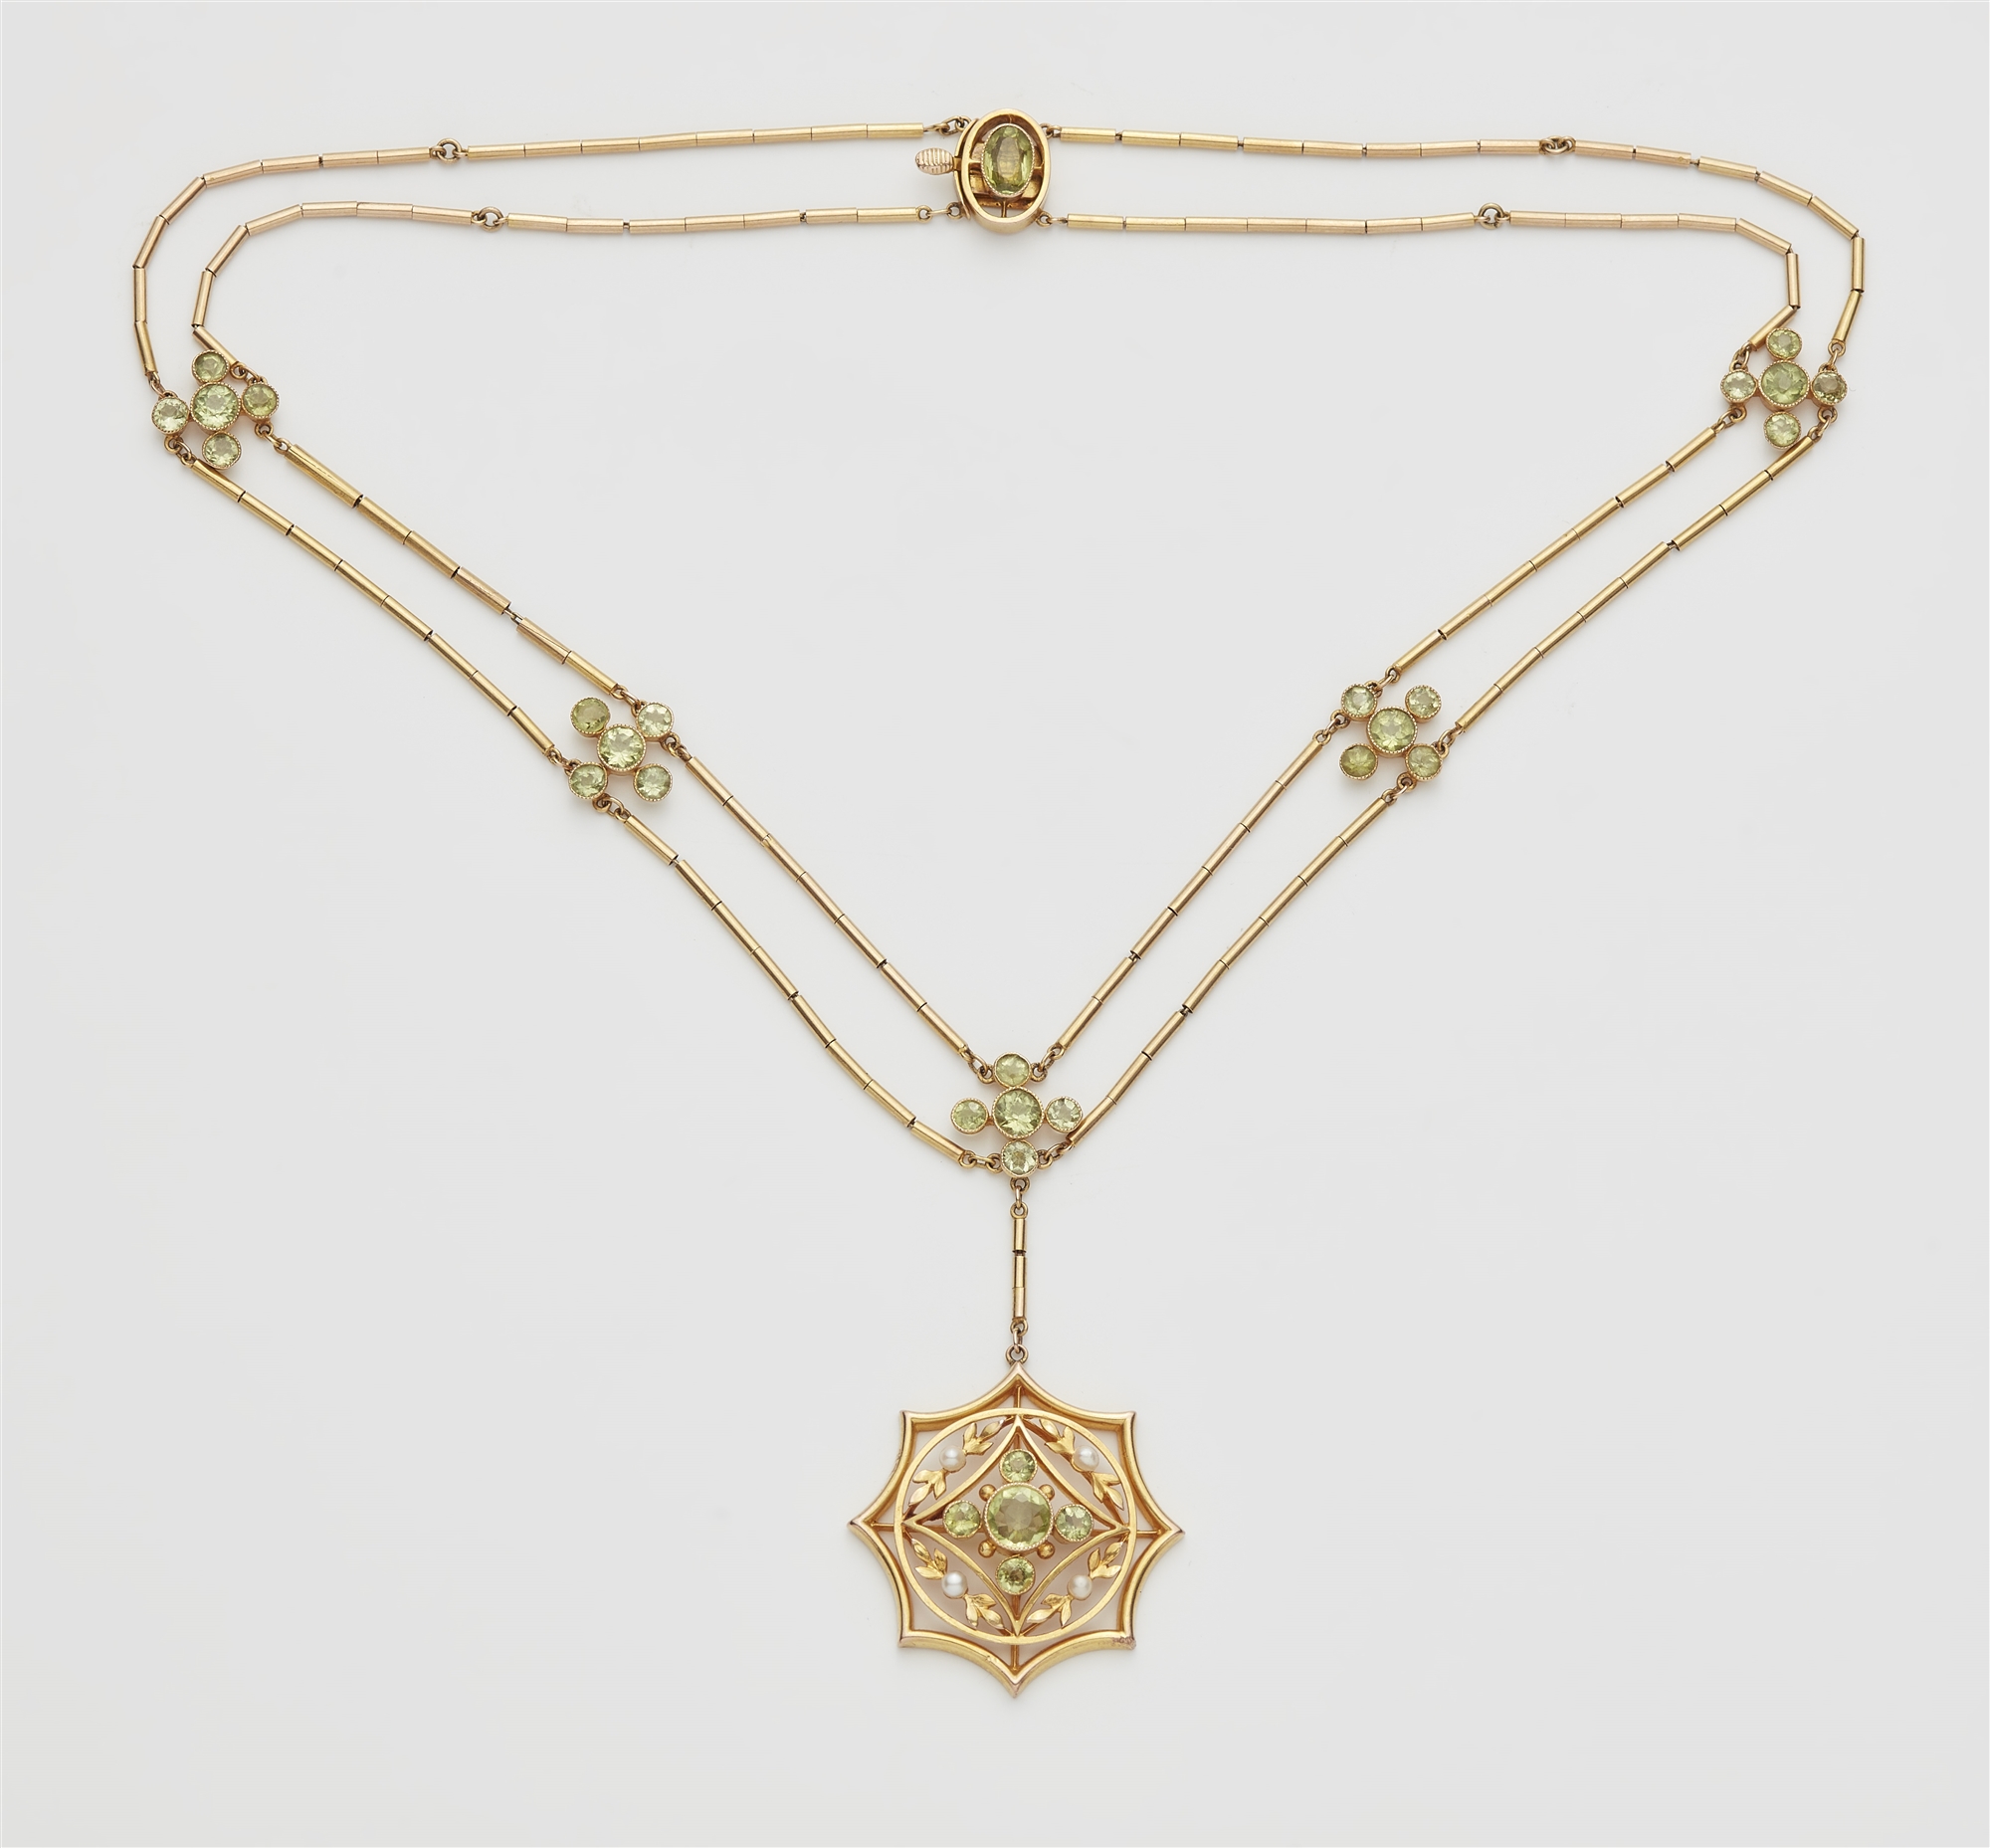 A probably English 9k gold and peridot pendant necklace.